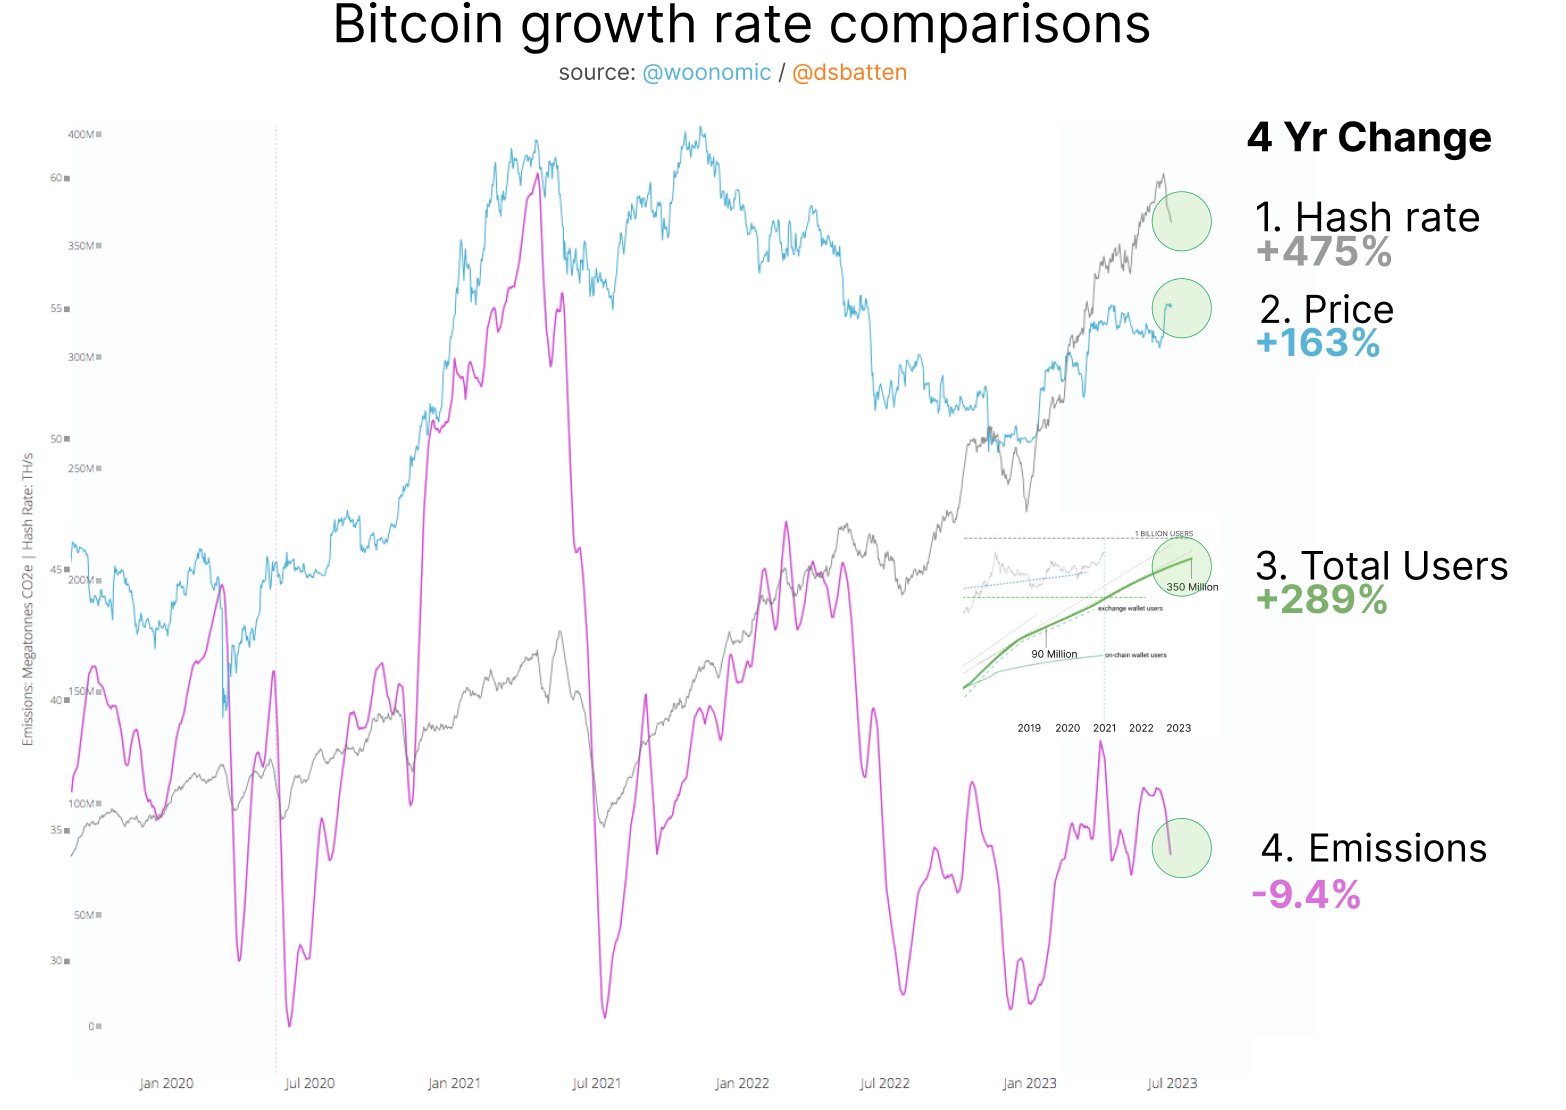 Bitcoin growth rate comparison